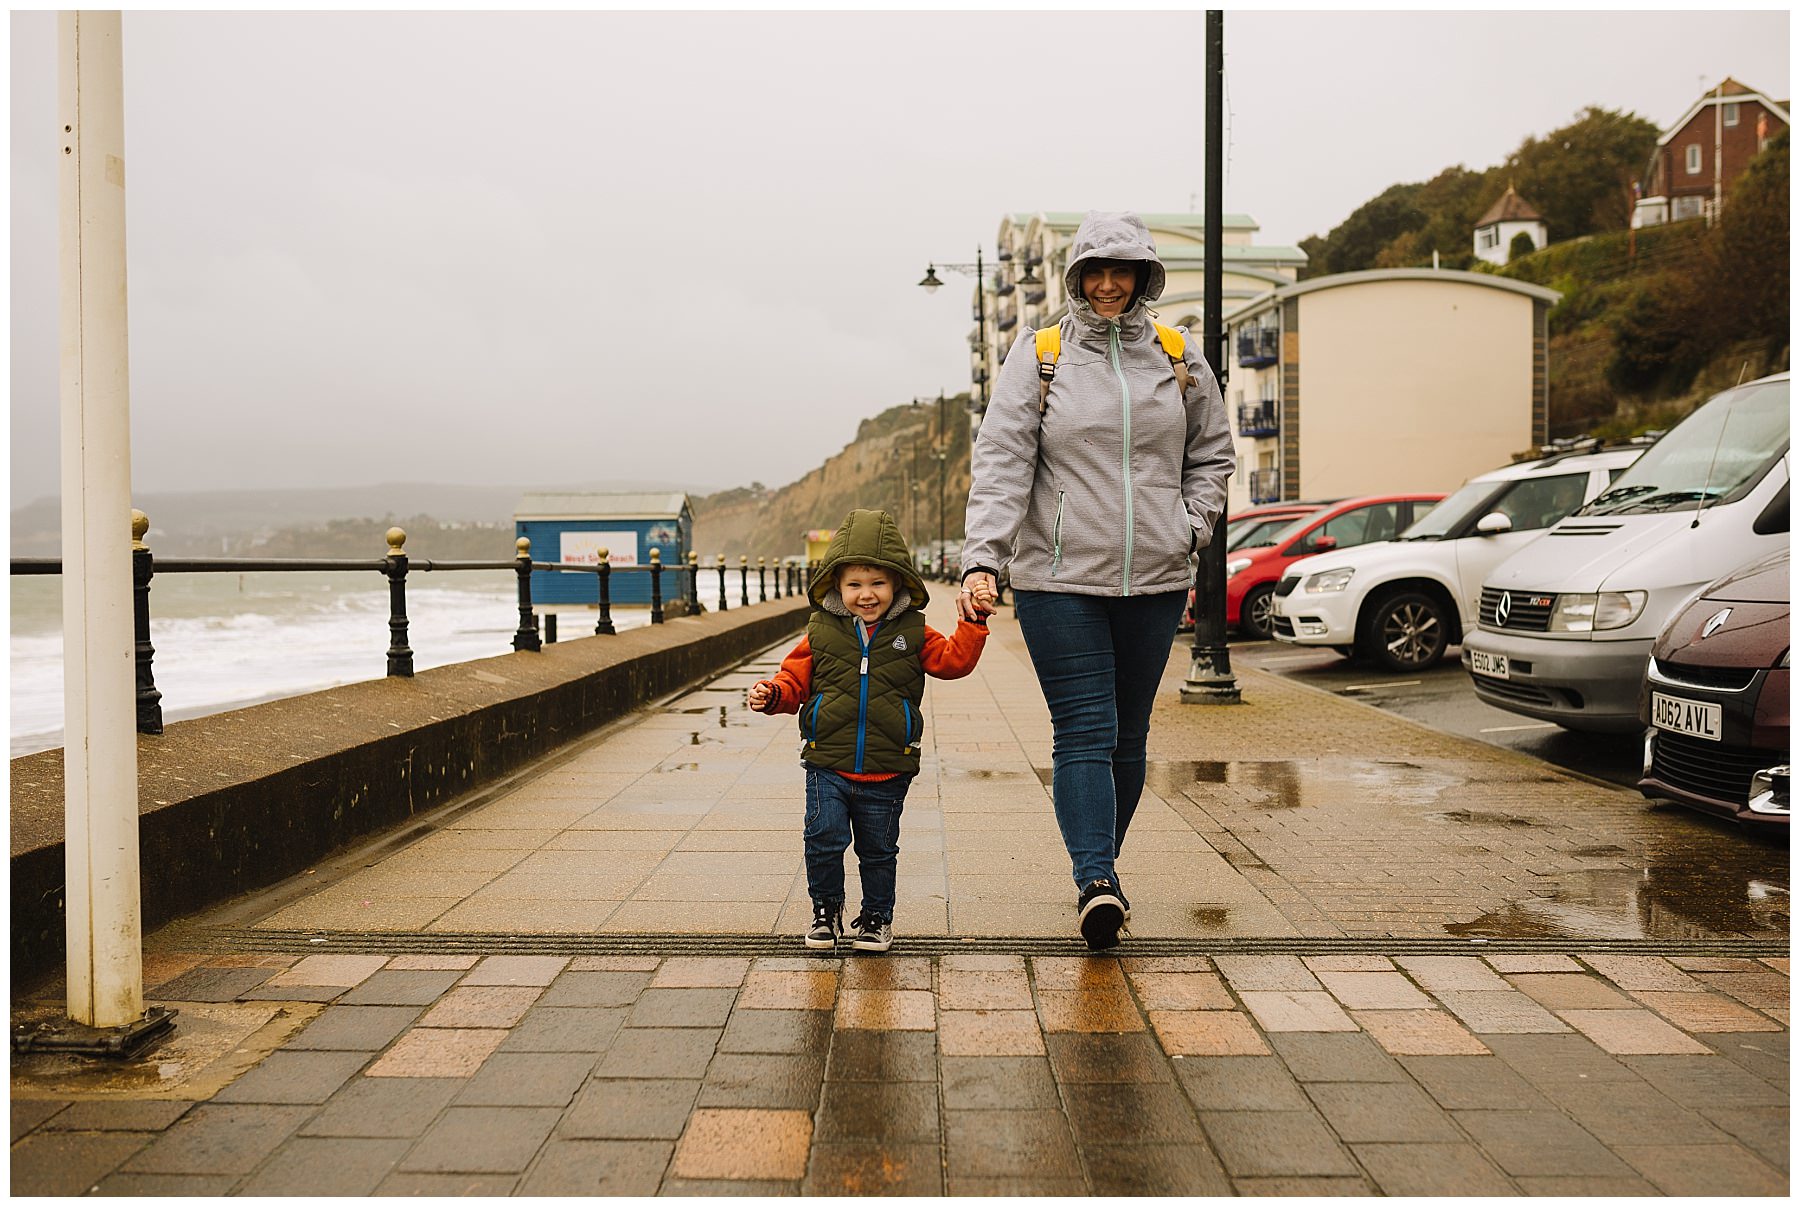 Rainy day family photography at Sandown on the Isle Of Wight